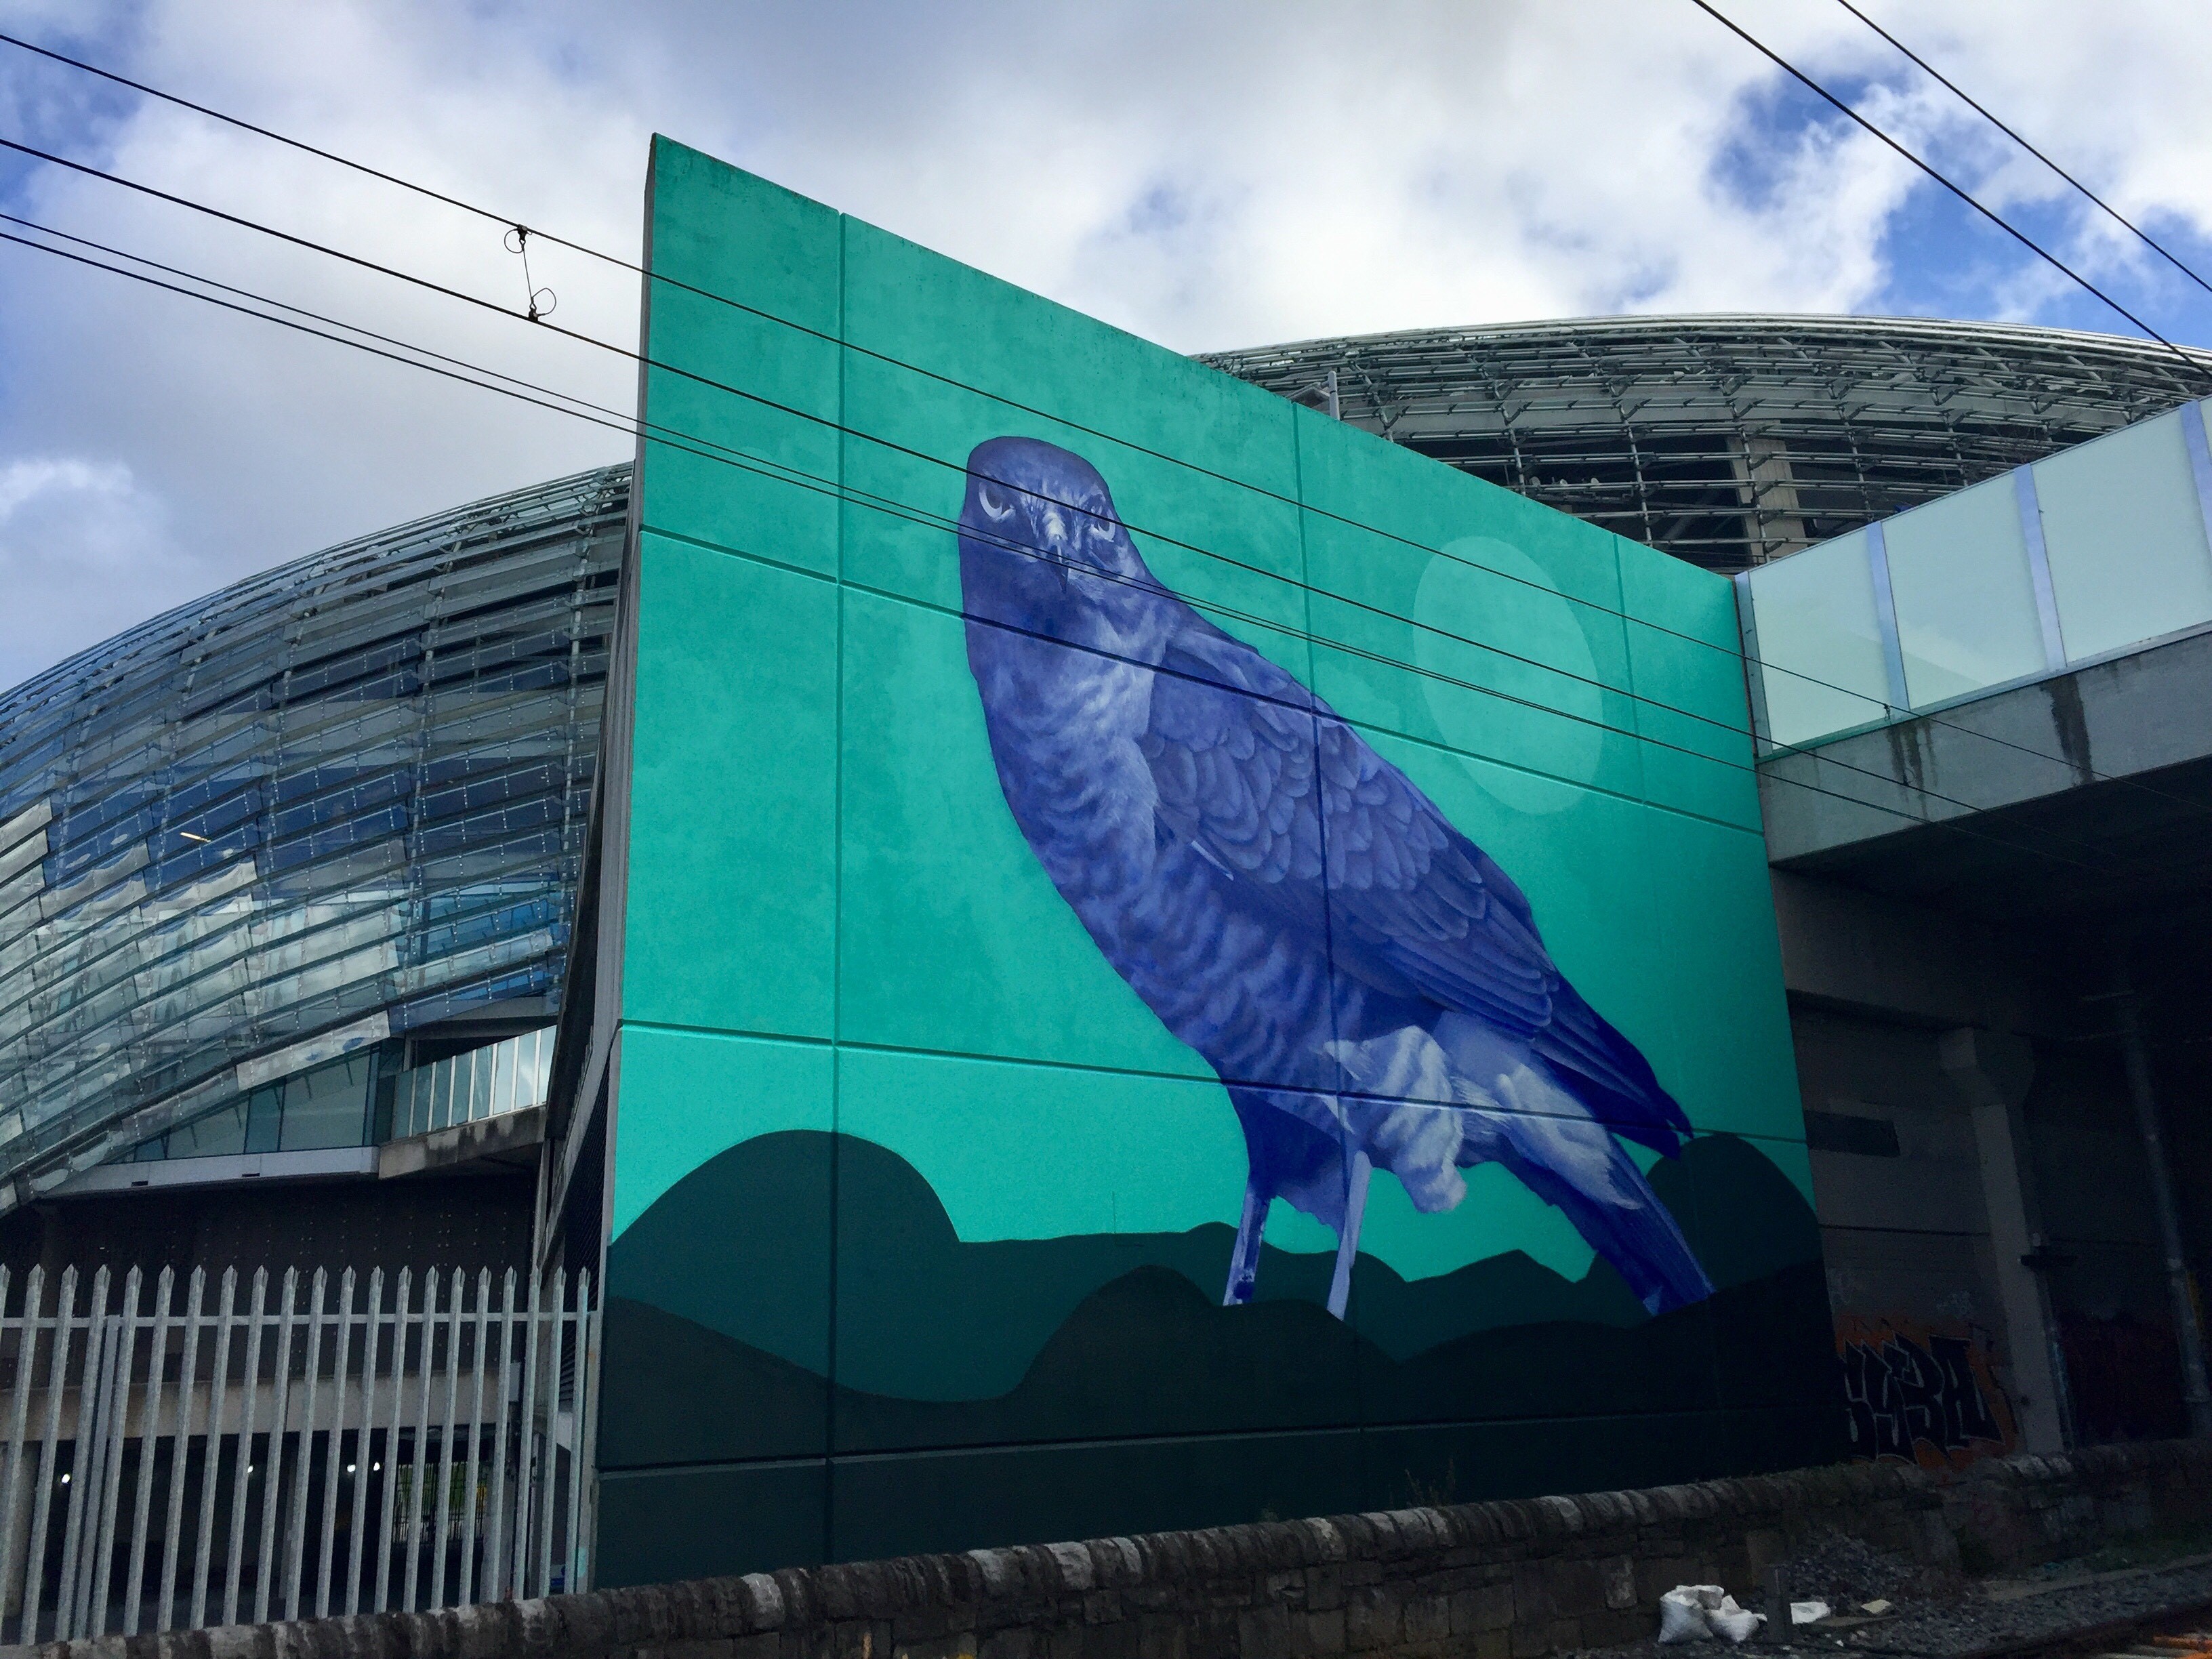 The Hawk image at the northern end of the stadium